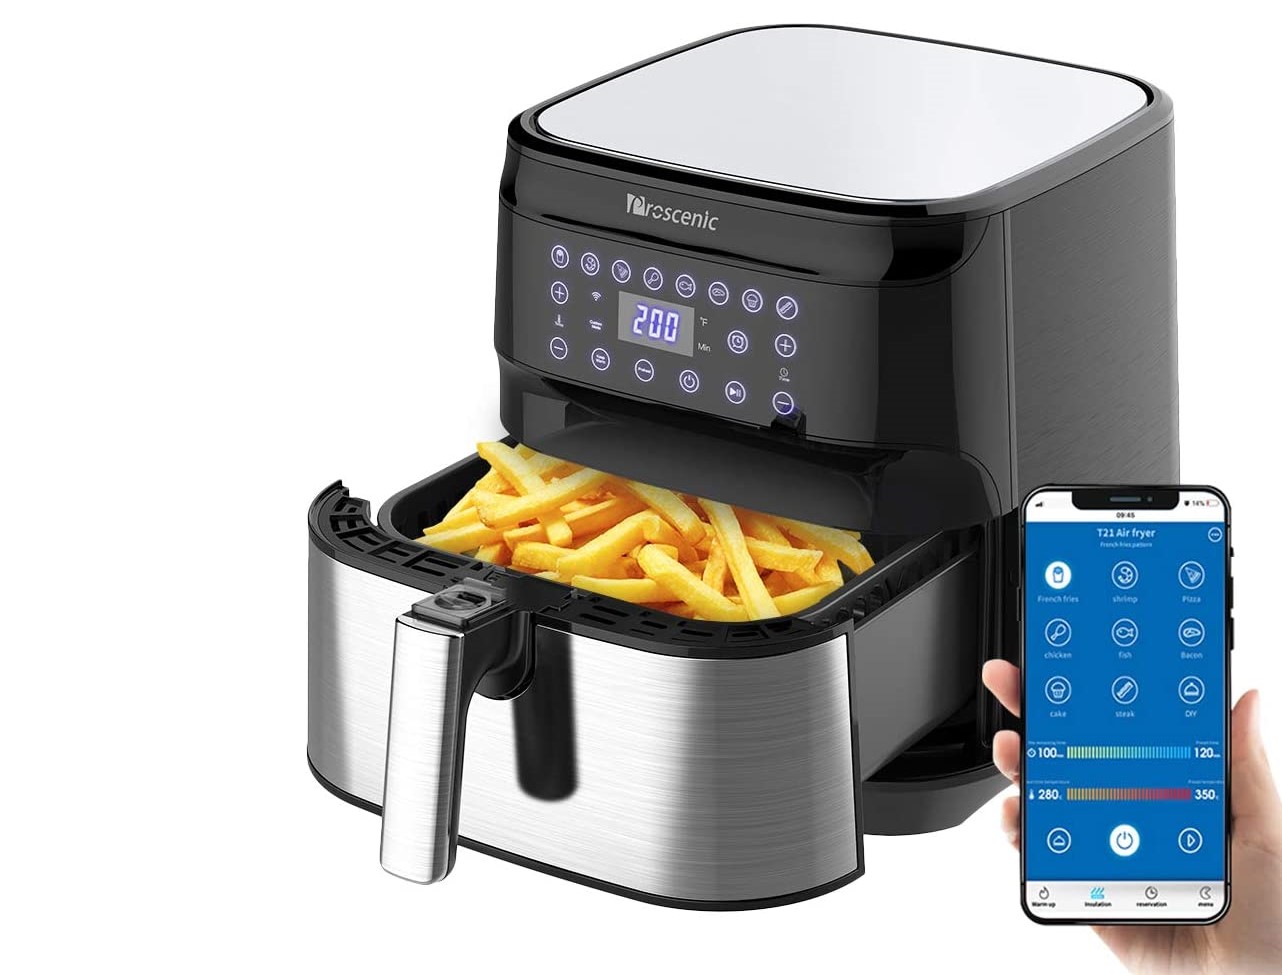 Proscenic T21 Smart Air Fryer review